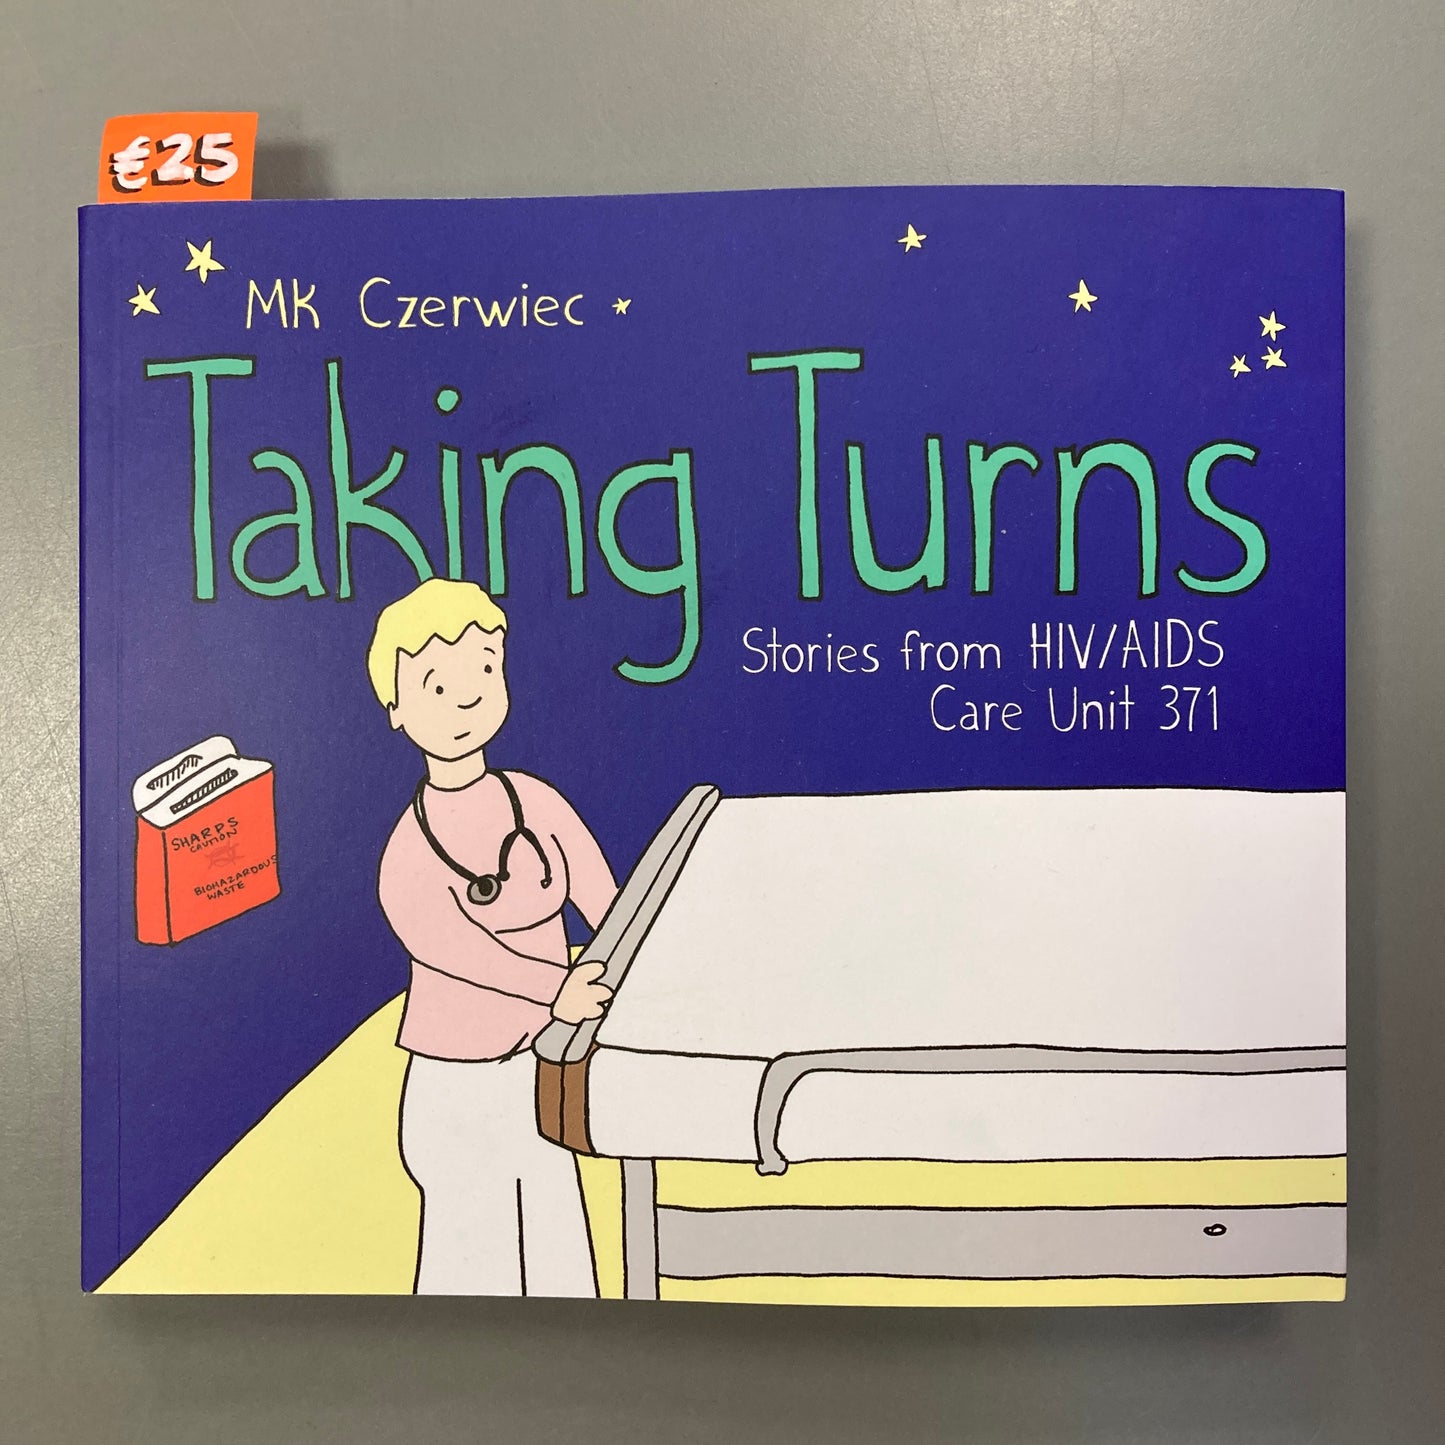 Taking Turns: Stories from HIV/AIDS Care Unit 371